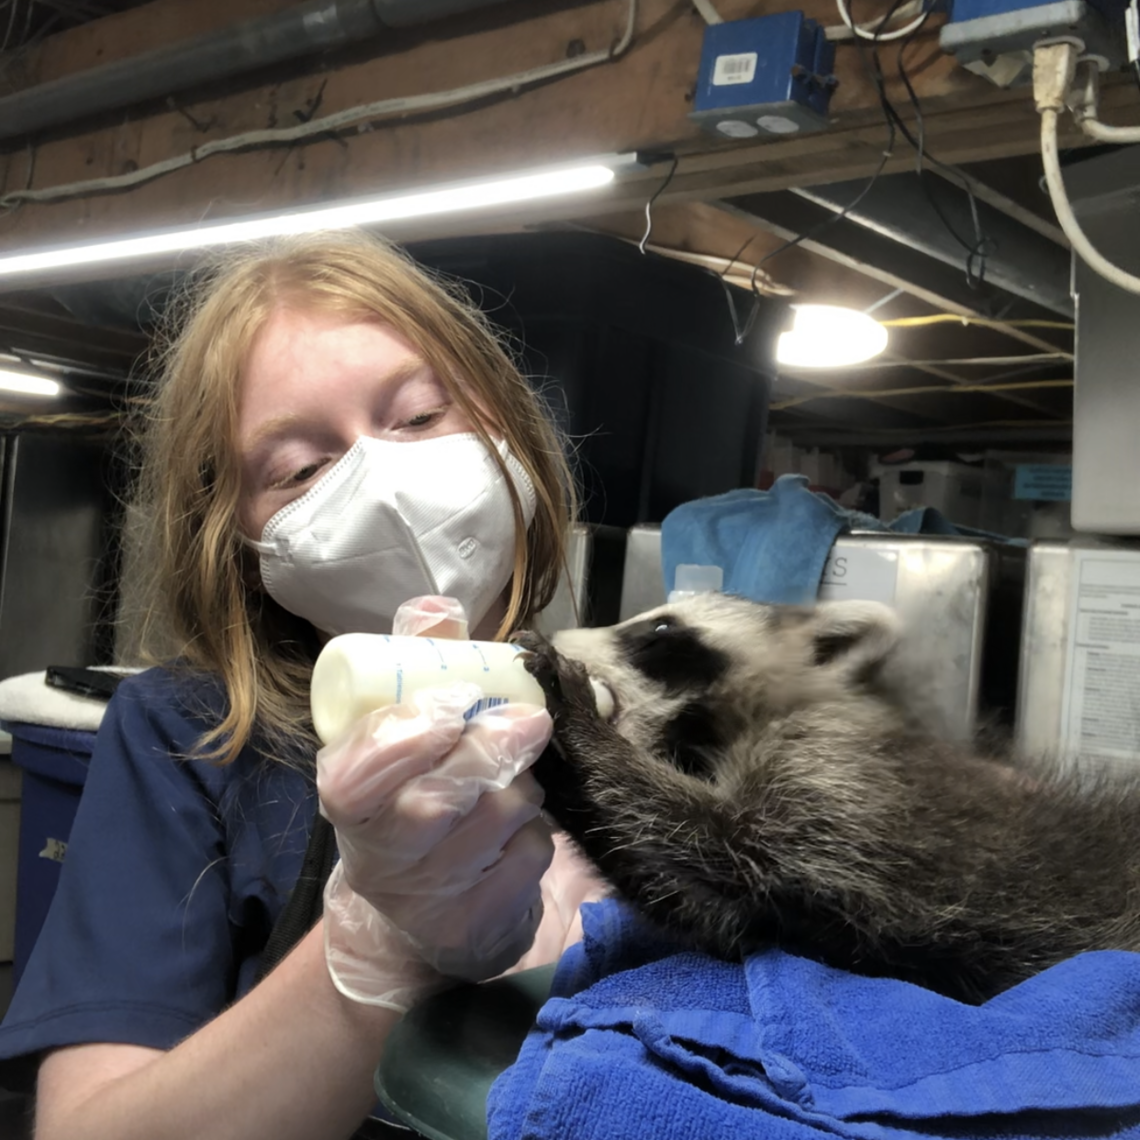 "I’ve fallen in love with every single creature I’ve held — especially the baby raccoons," Adam said. "It makes me so happy to see them thriving and returning to their natural habitats.”